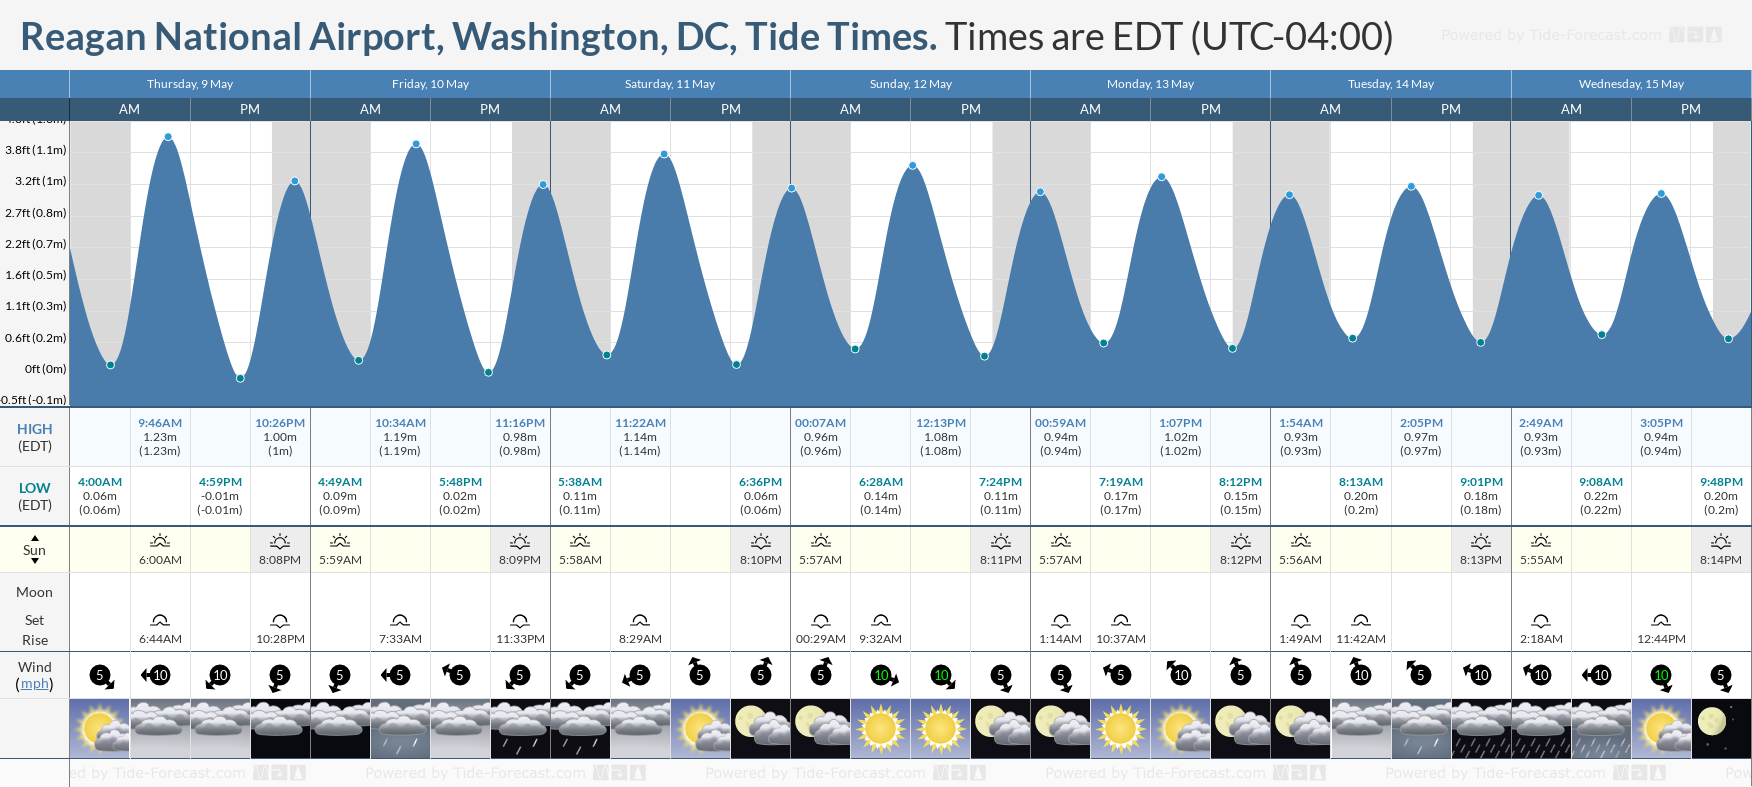 Reagan National Airport, Washington, DC Tide Chart including high and low tide times for the next 7 days